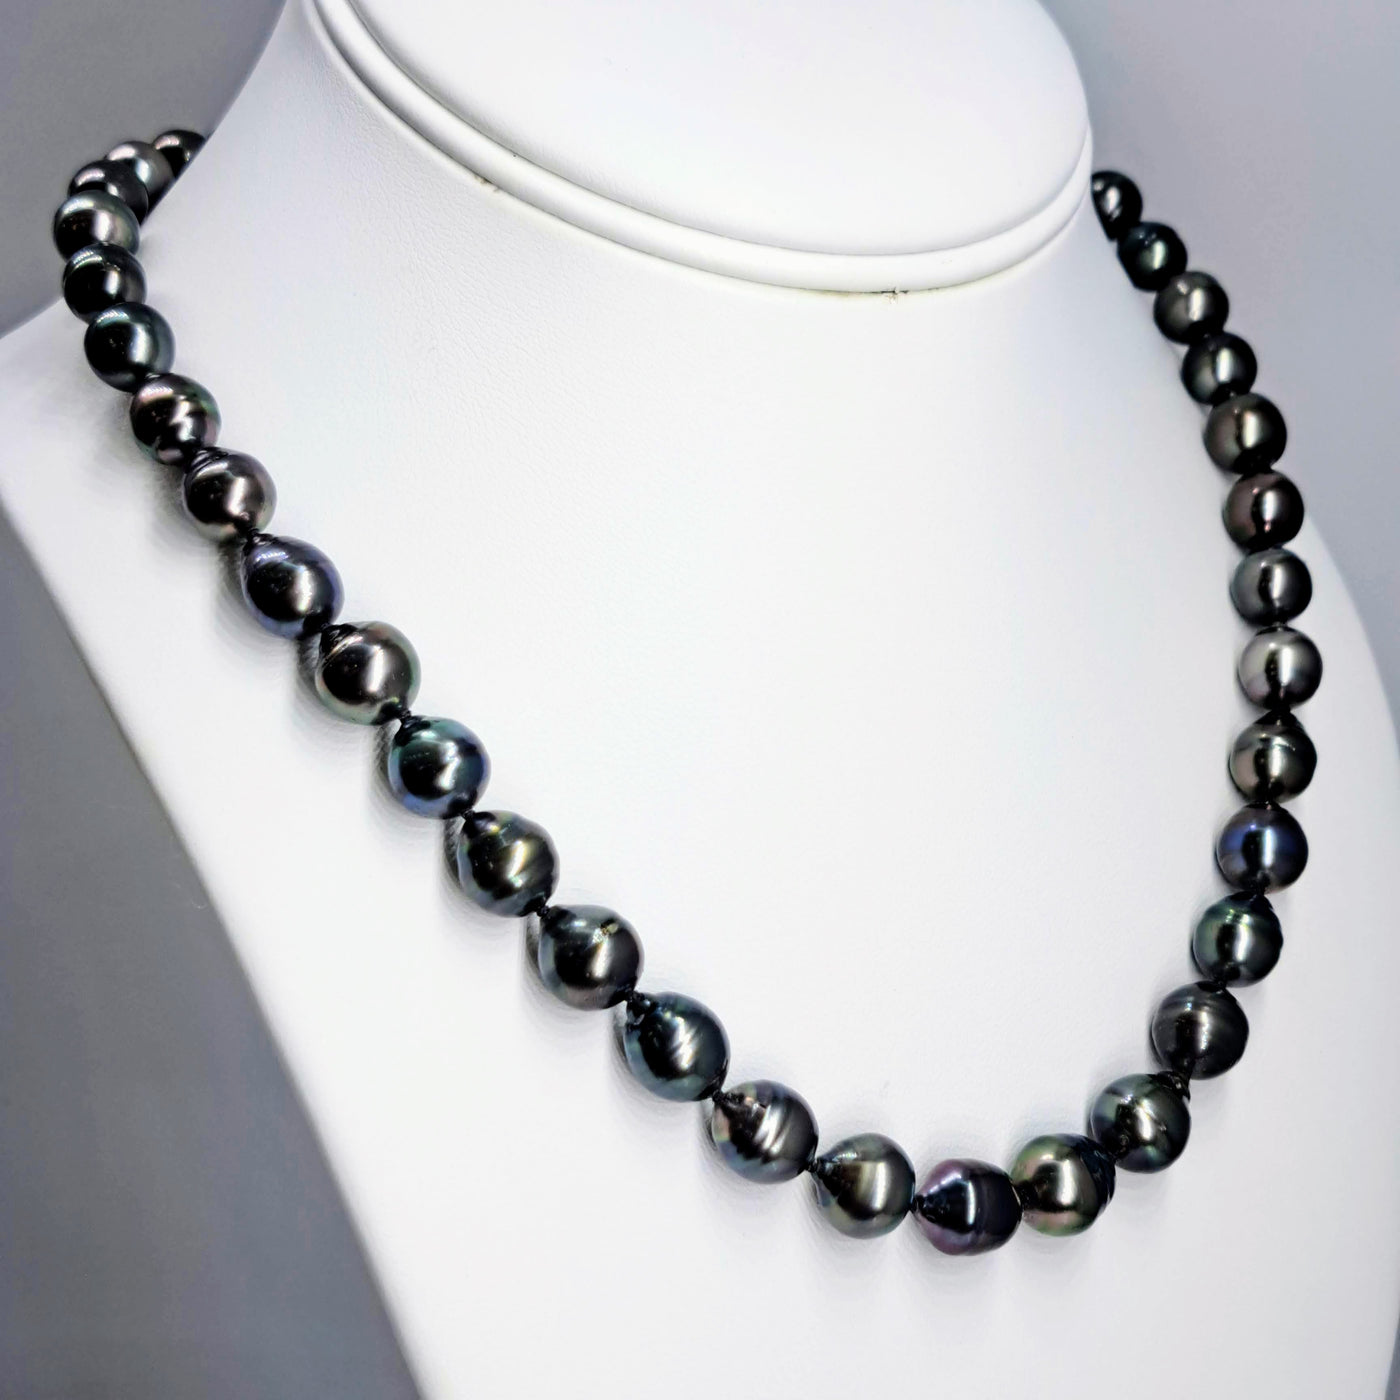 "If It's Not Baroque..." 18" Necklace - Black Tahitian Pearls, Silk, 14K Gold Clasp